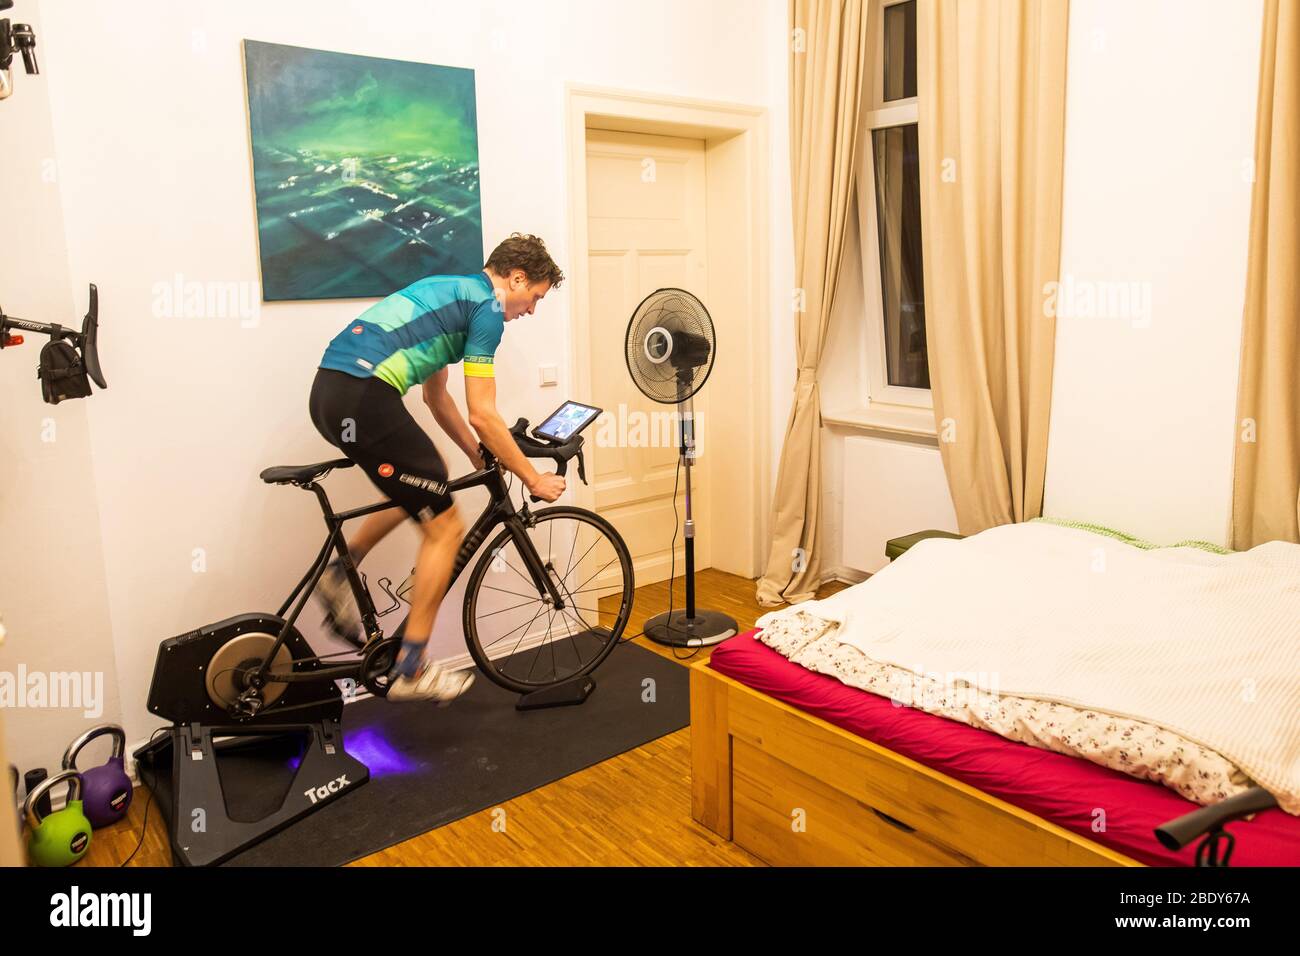 03 April 2020, Lower Saxony, Hanover: Amateur cyclist Nico Herzog trains on  the roller trainer or exercise bike in his bedroom. He uses a bike  simulation app called Zwift in winter and